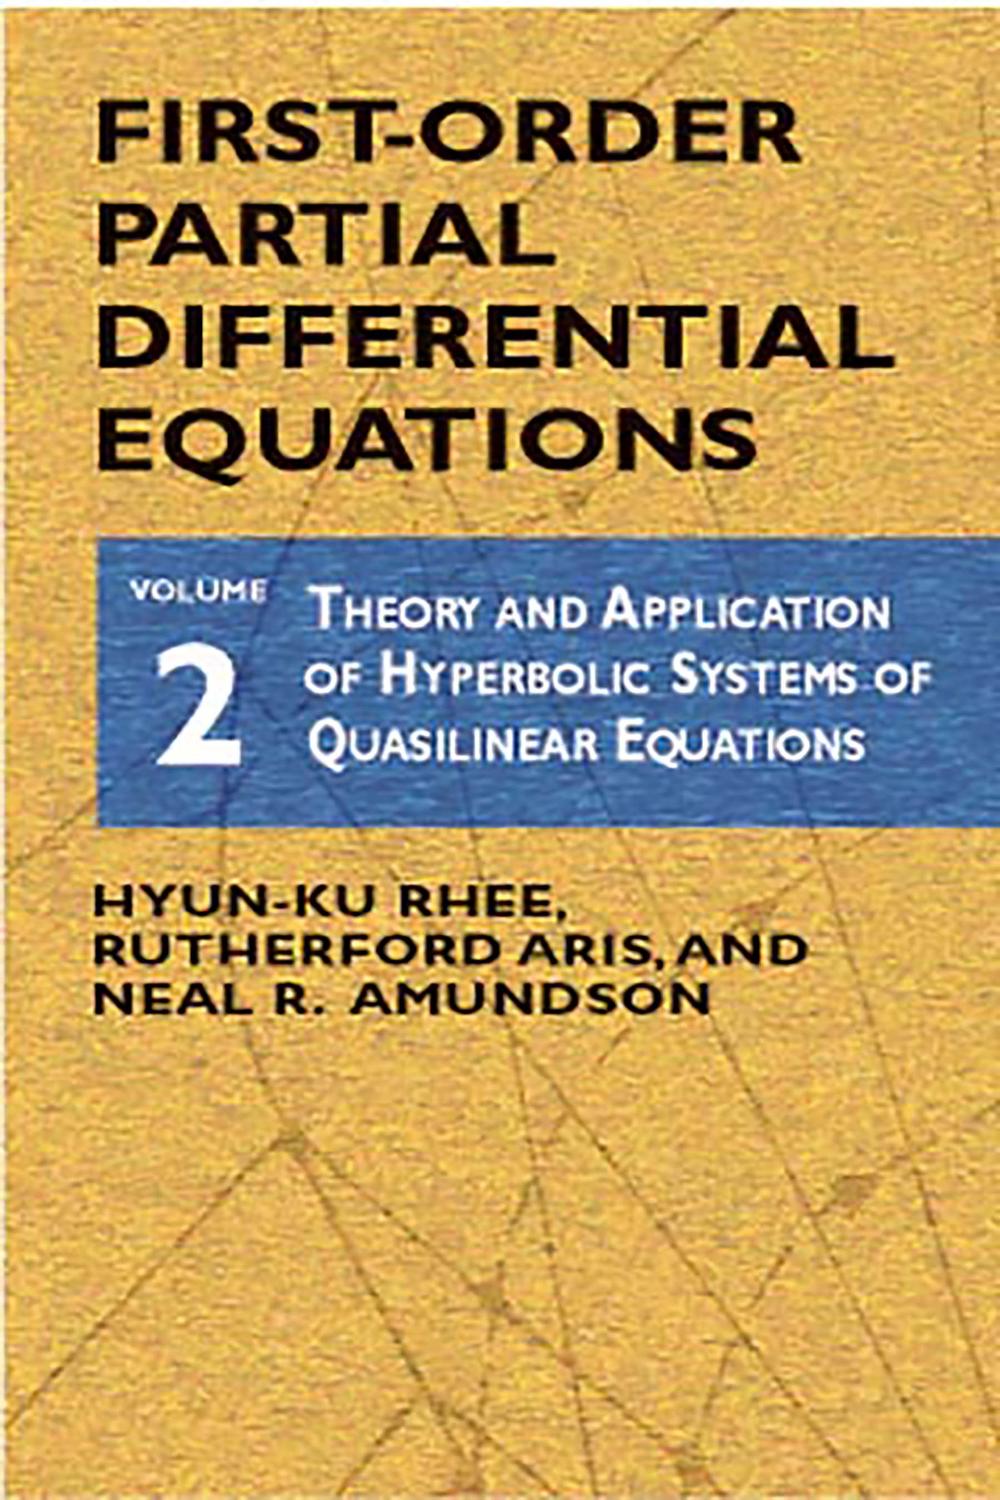 First-Order Partial Differential Equations, Vol. 2 - Hyun-Ku Rhee, Rutherford Aris, Neal R. Amundson